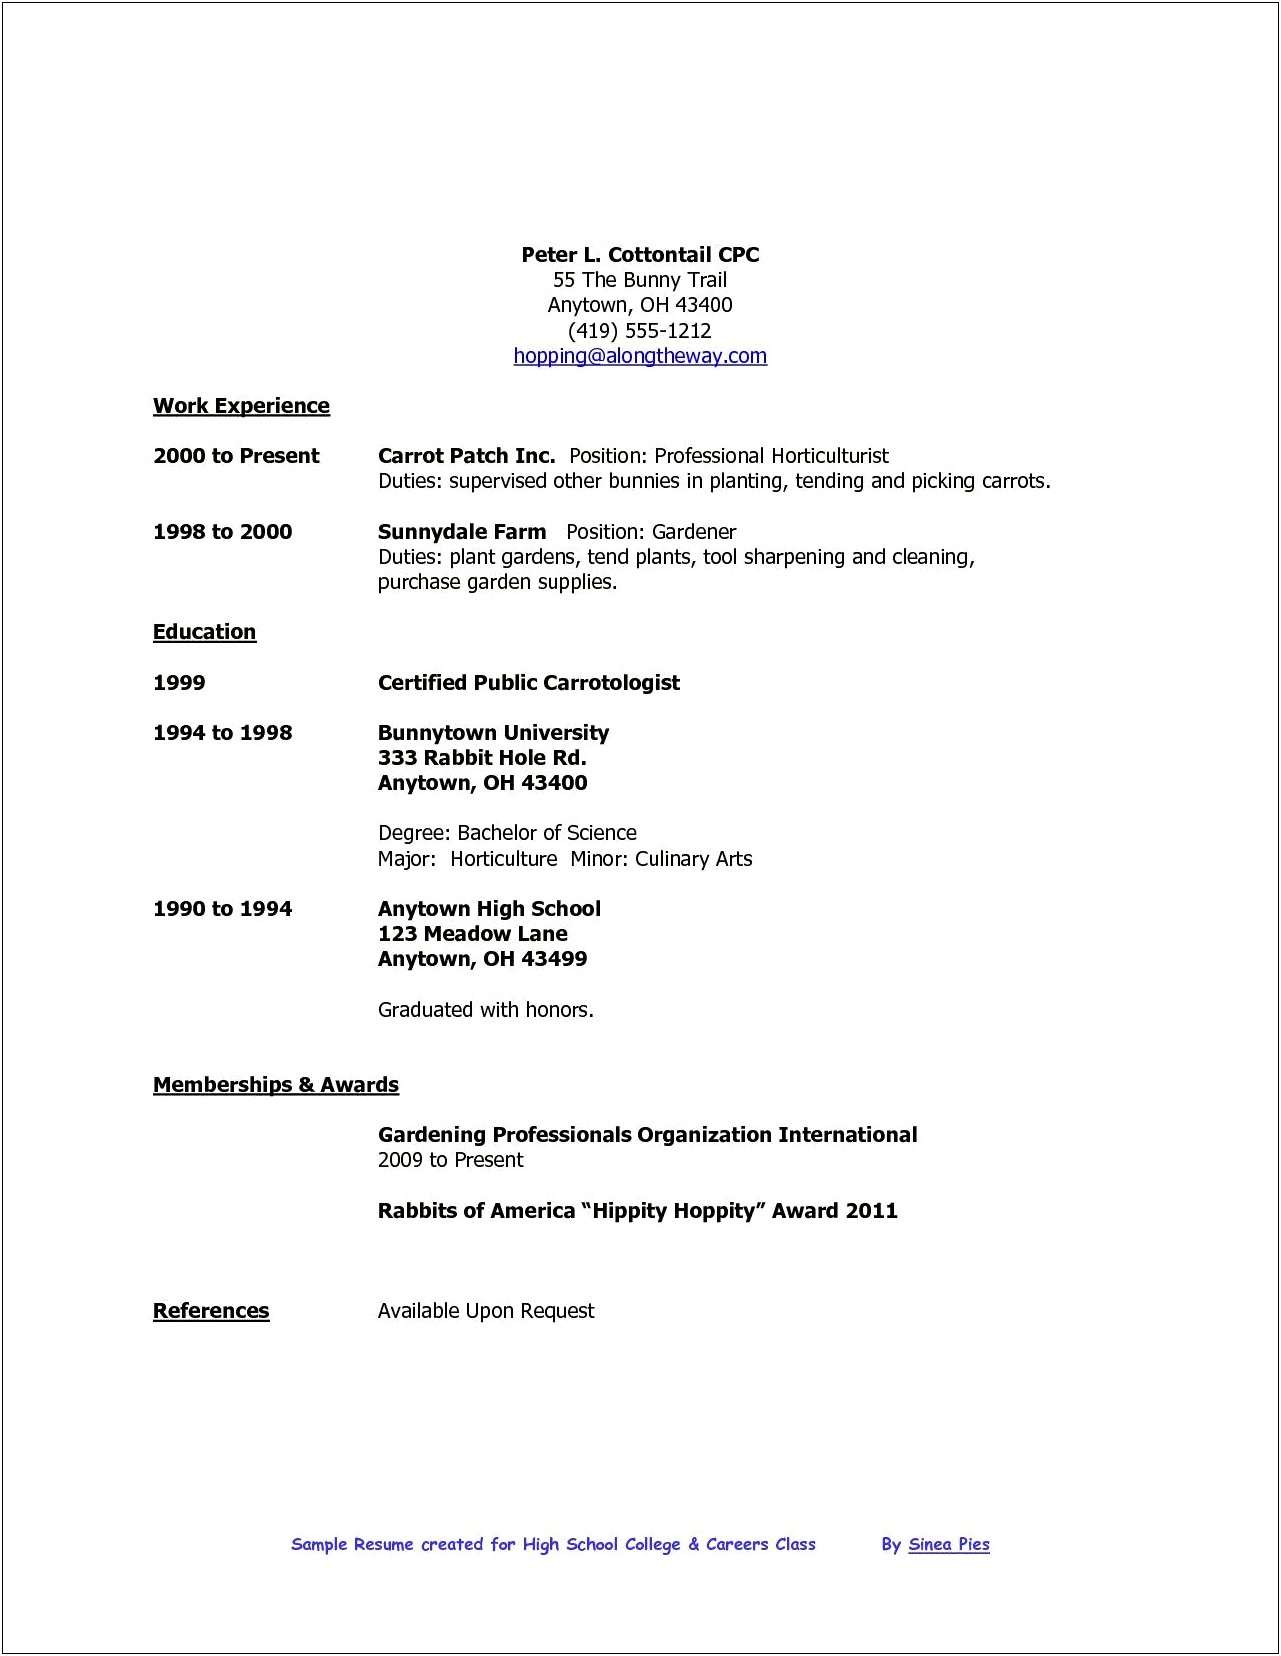 Resume For Graduate Student With No Experience